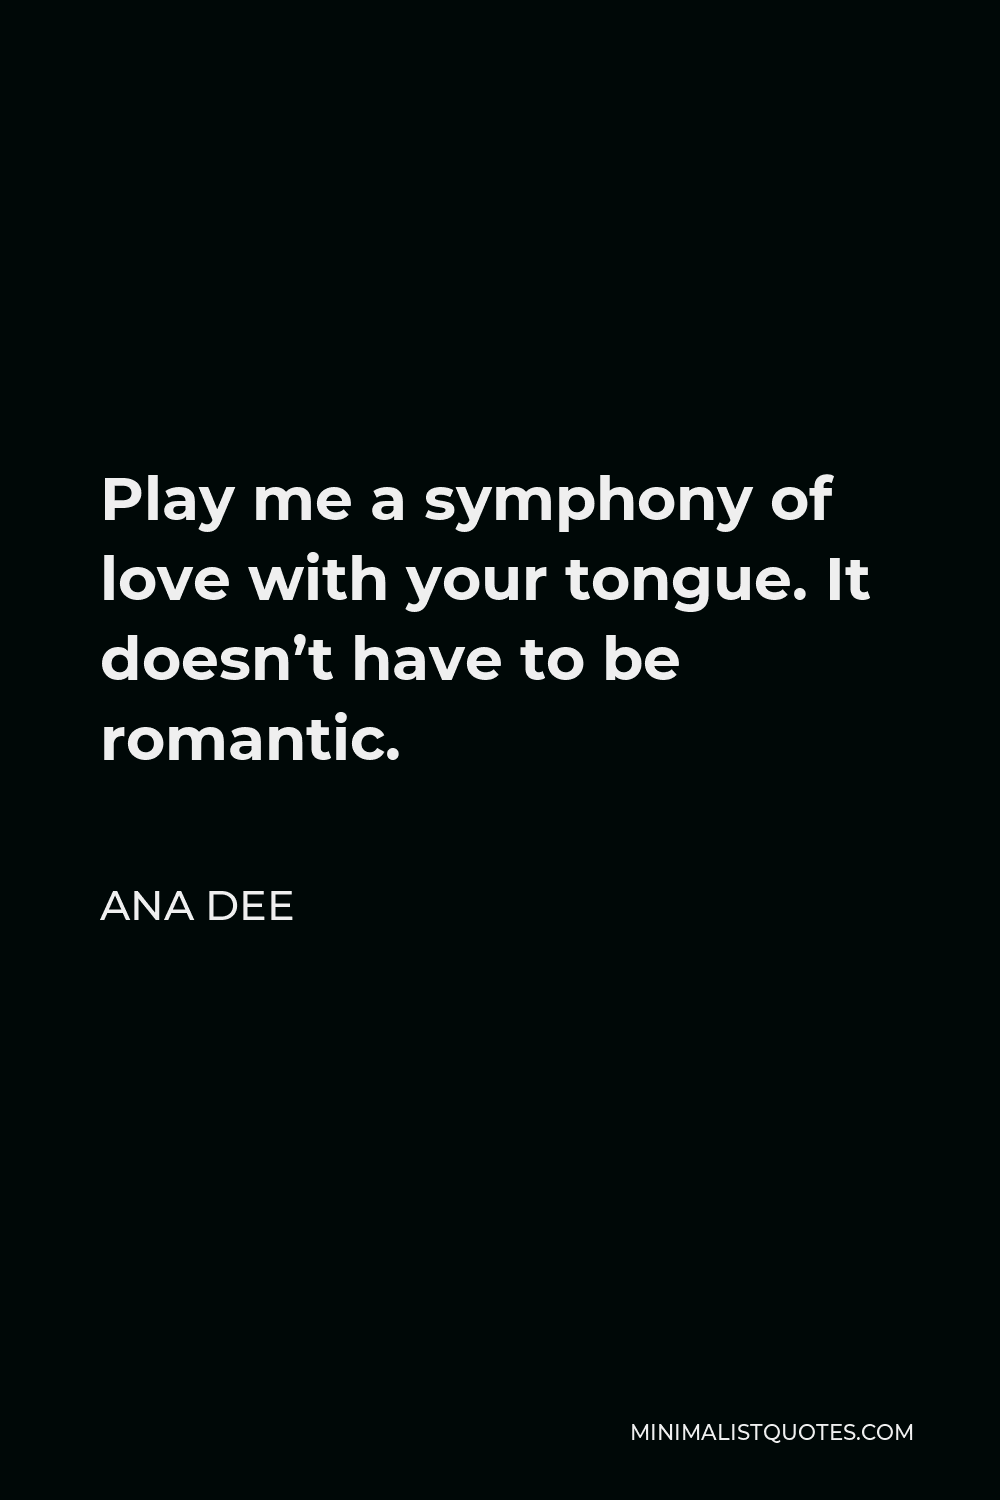 Ana Dee Quote - Play me a symphony of love with your tongue. It doesn’t have to be romantic.